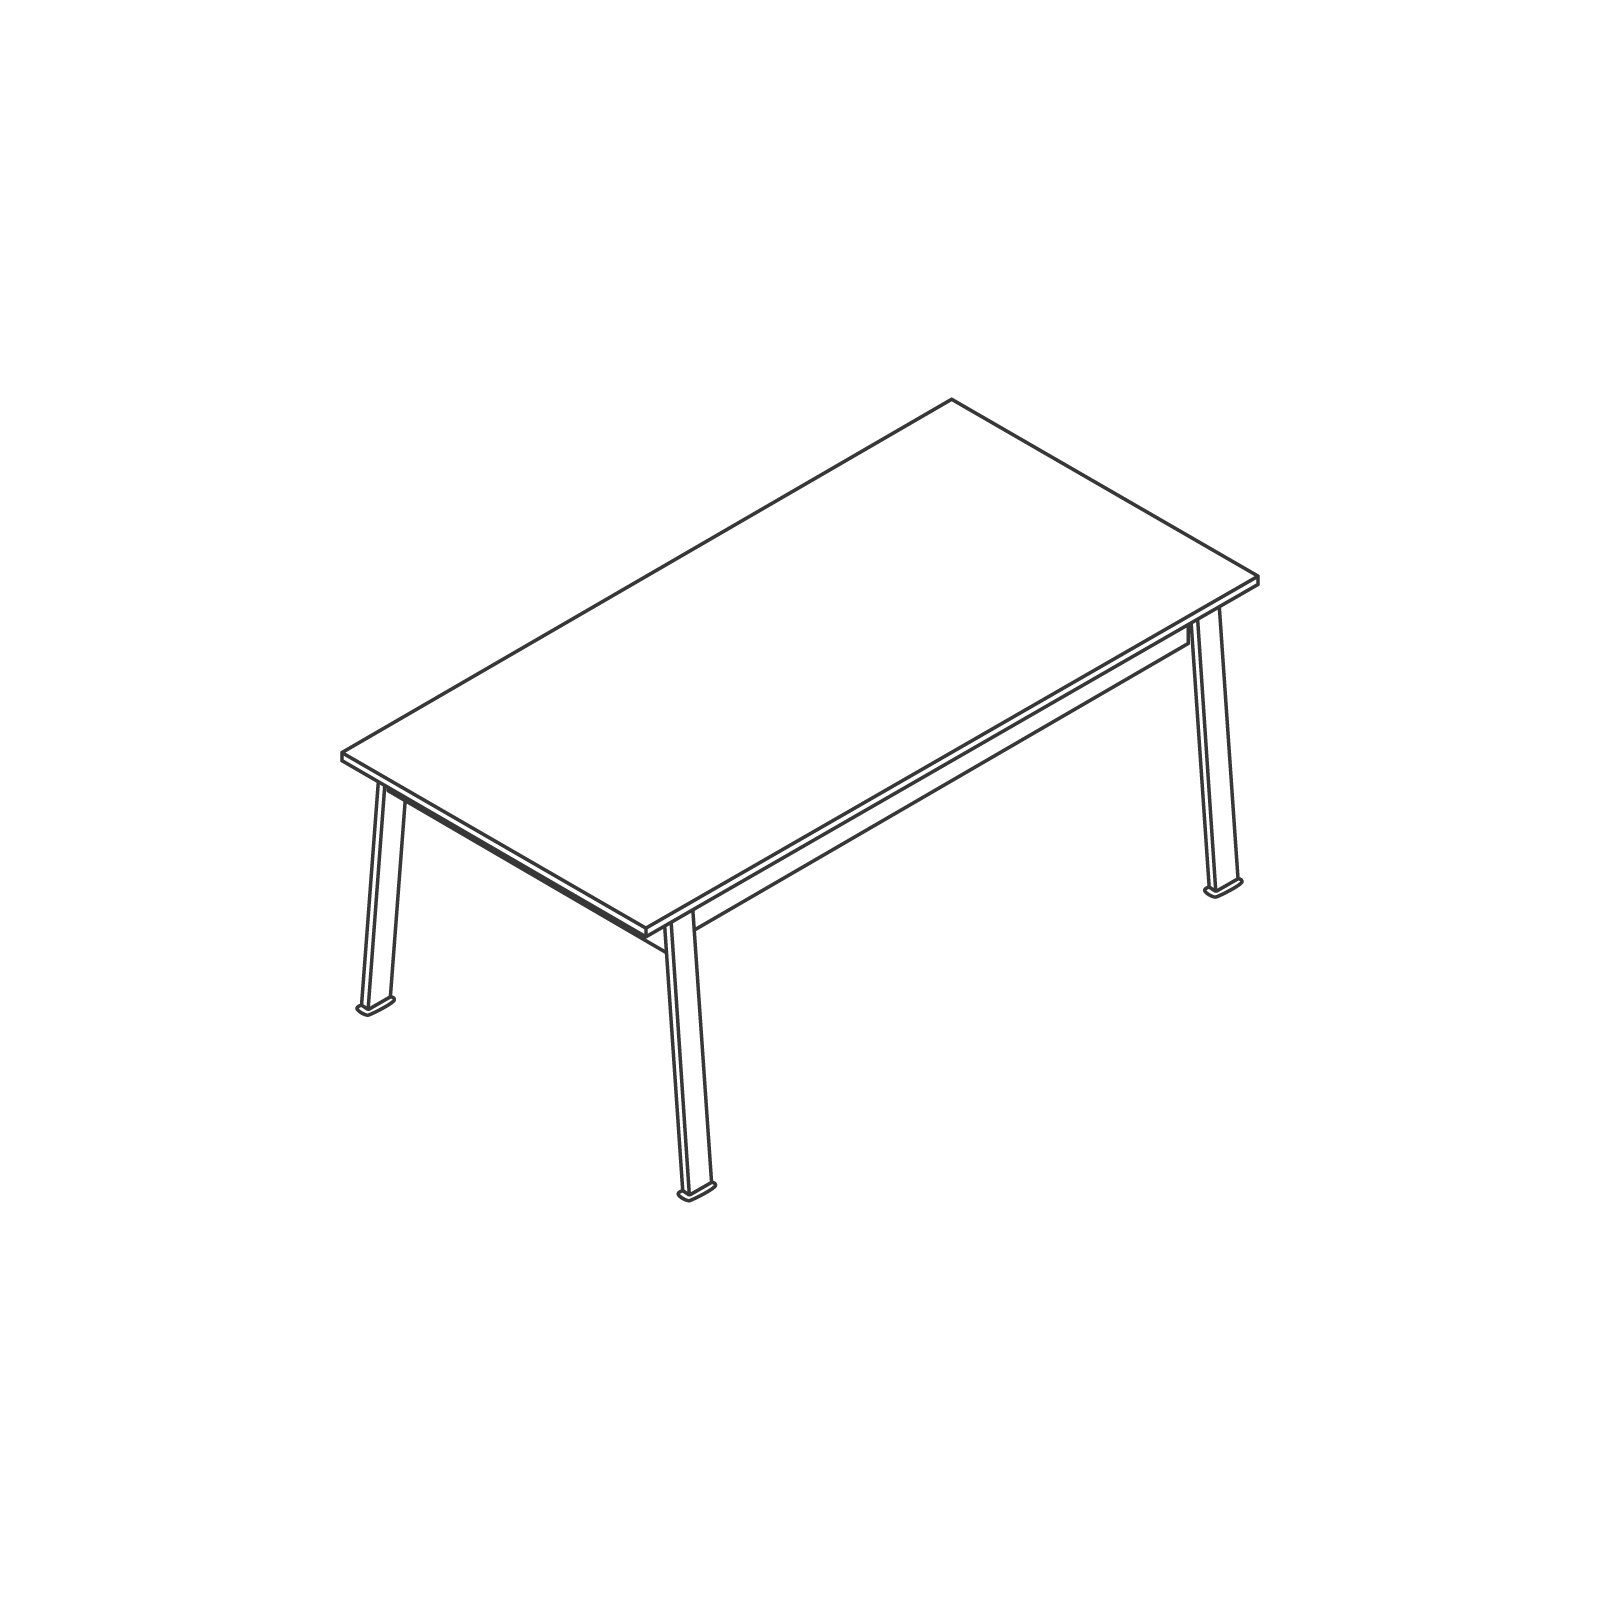 A line drawing - Nemschoff Easton Coffee Table